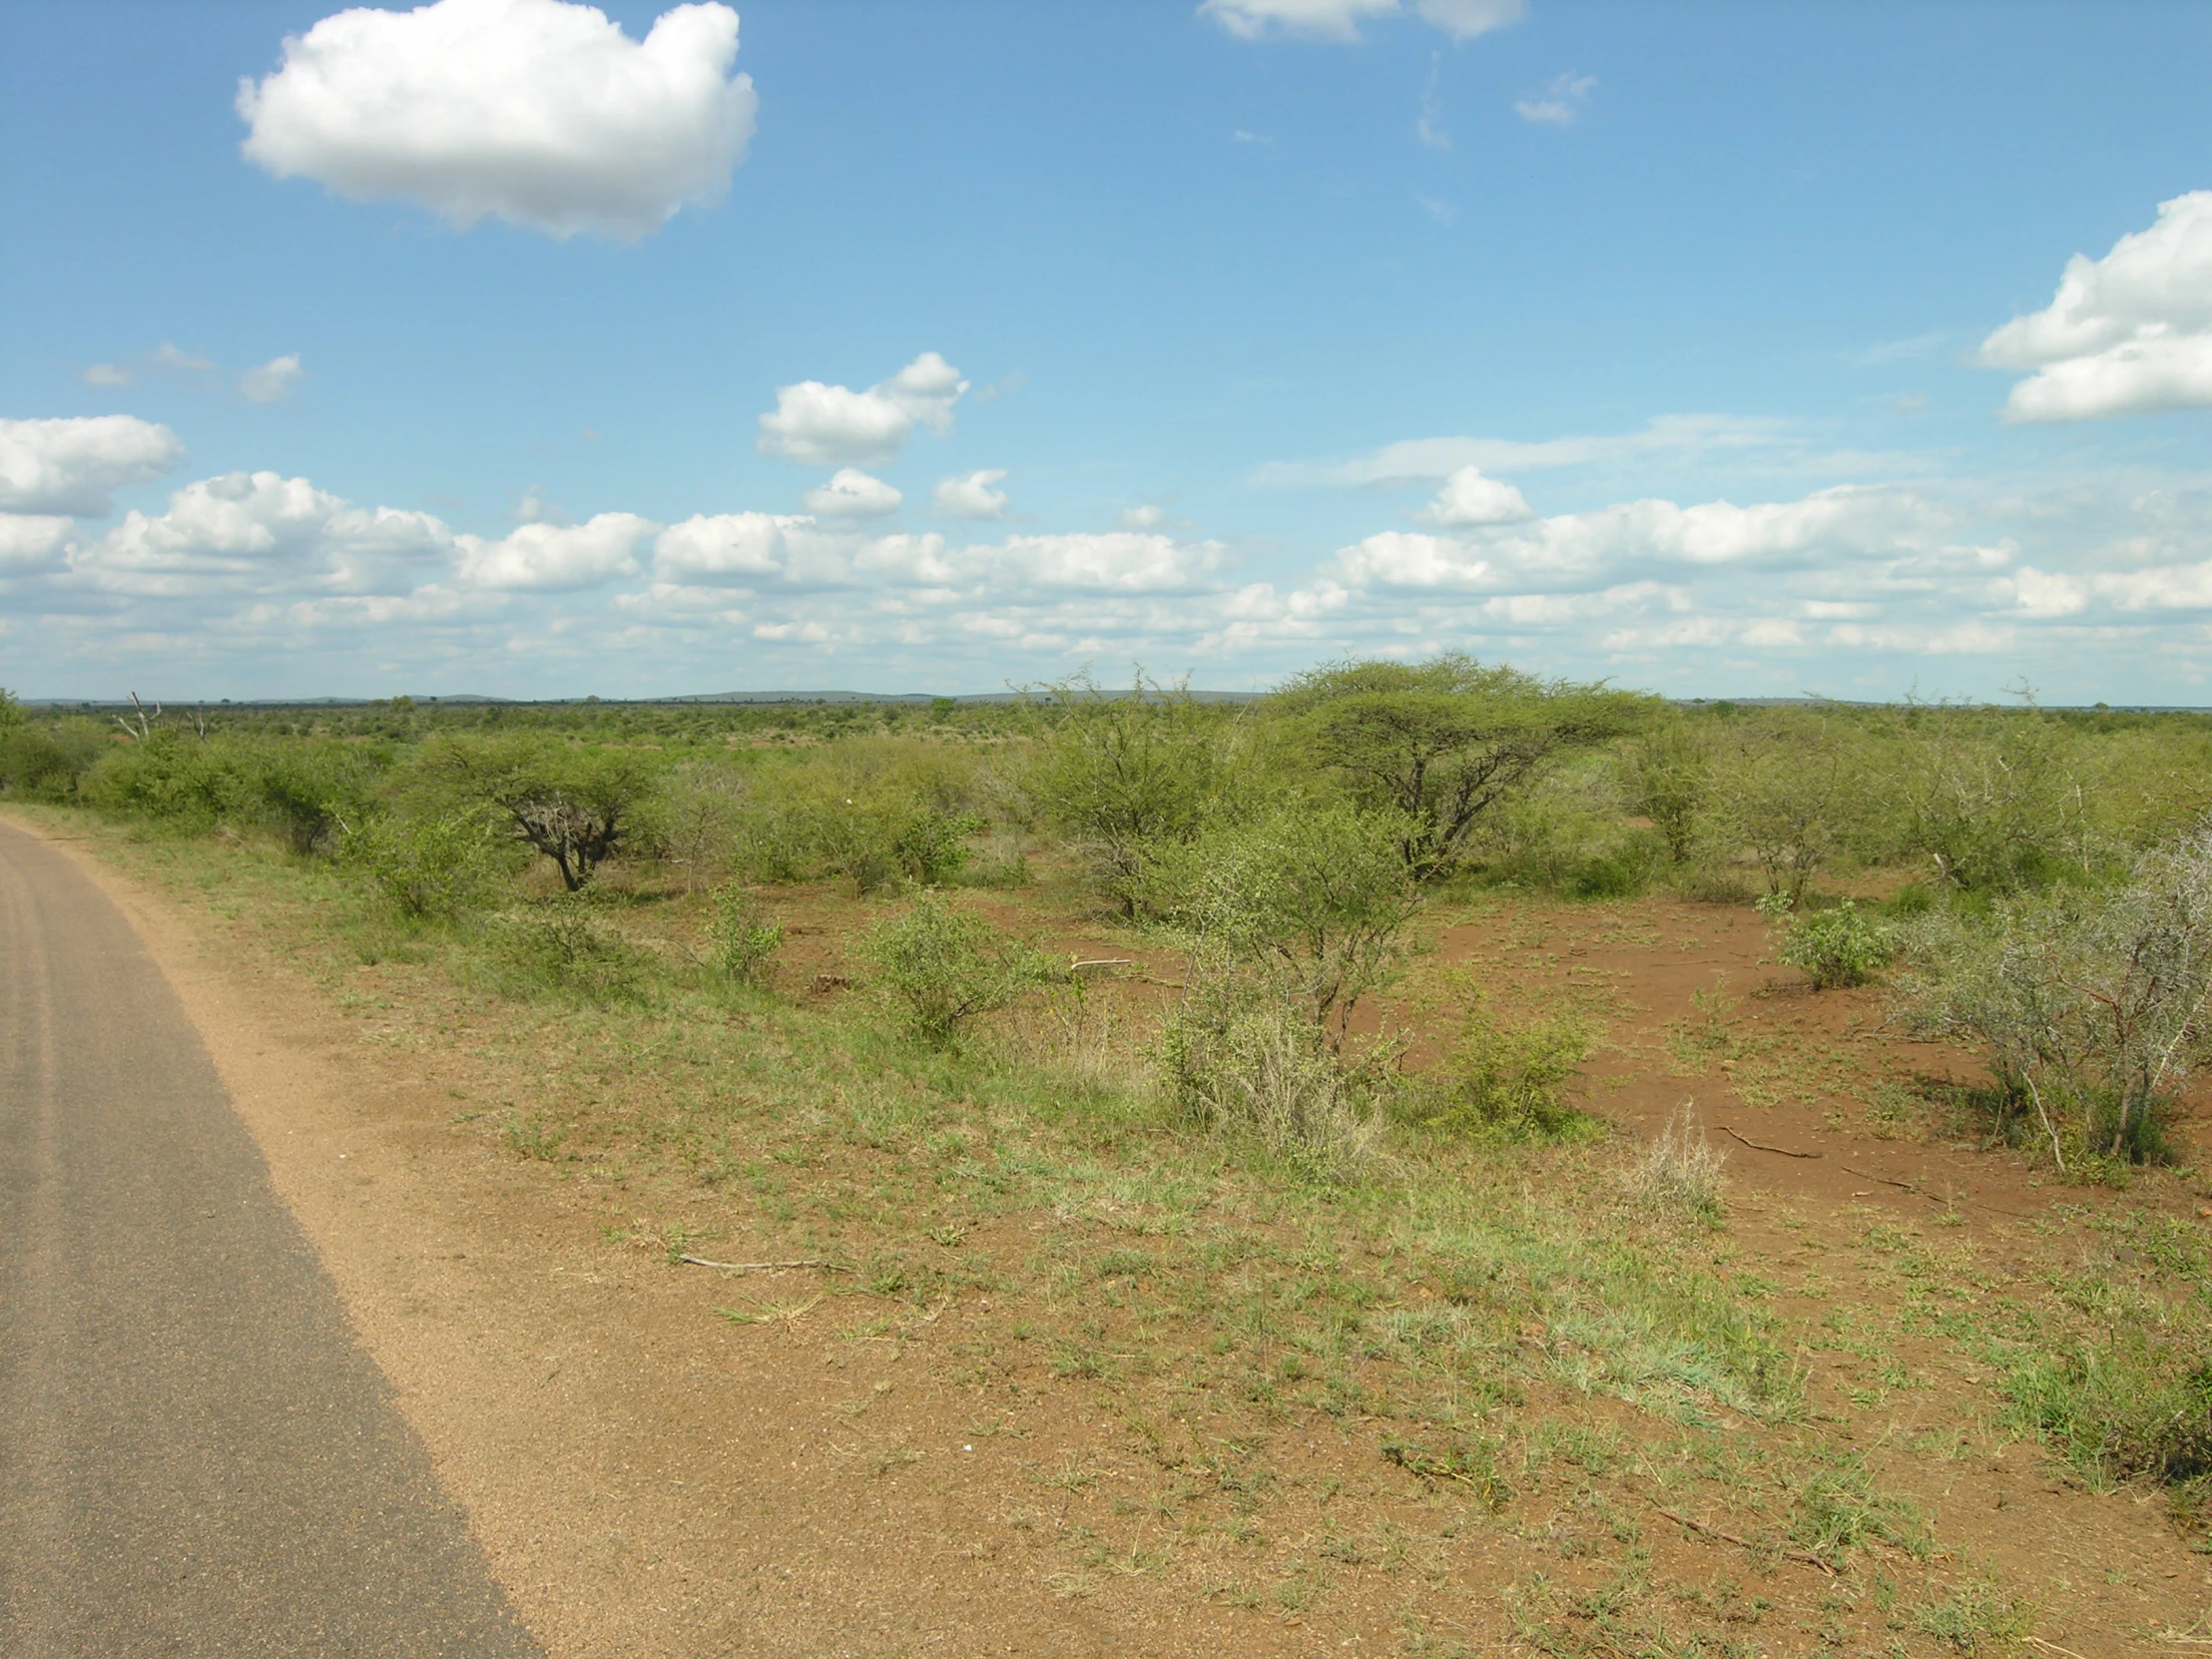 a dirt road stretches through grass and bushes